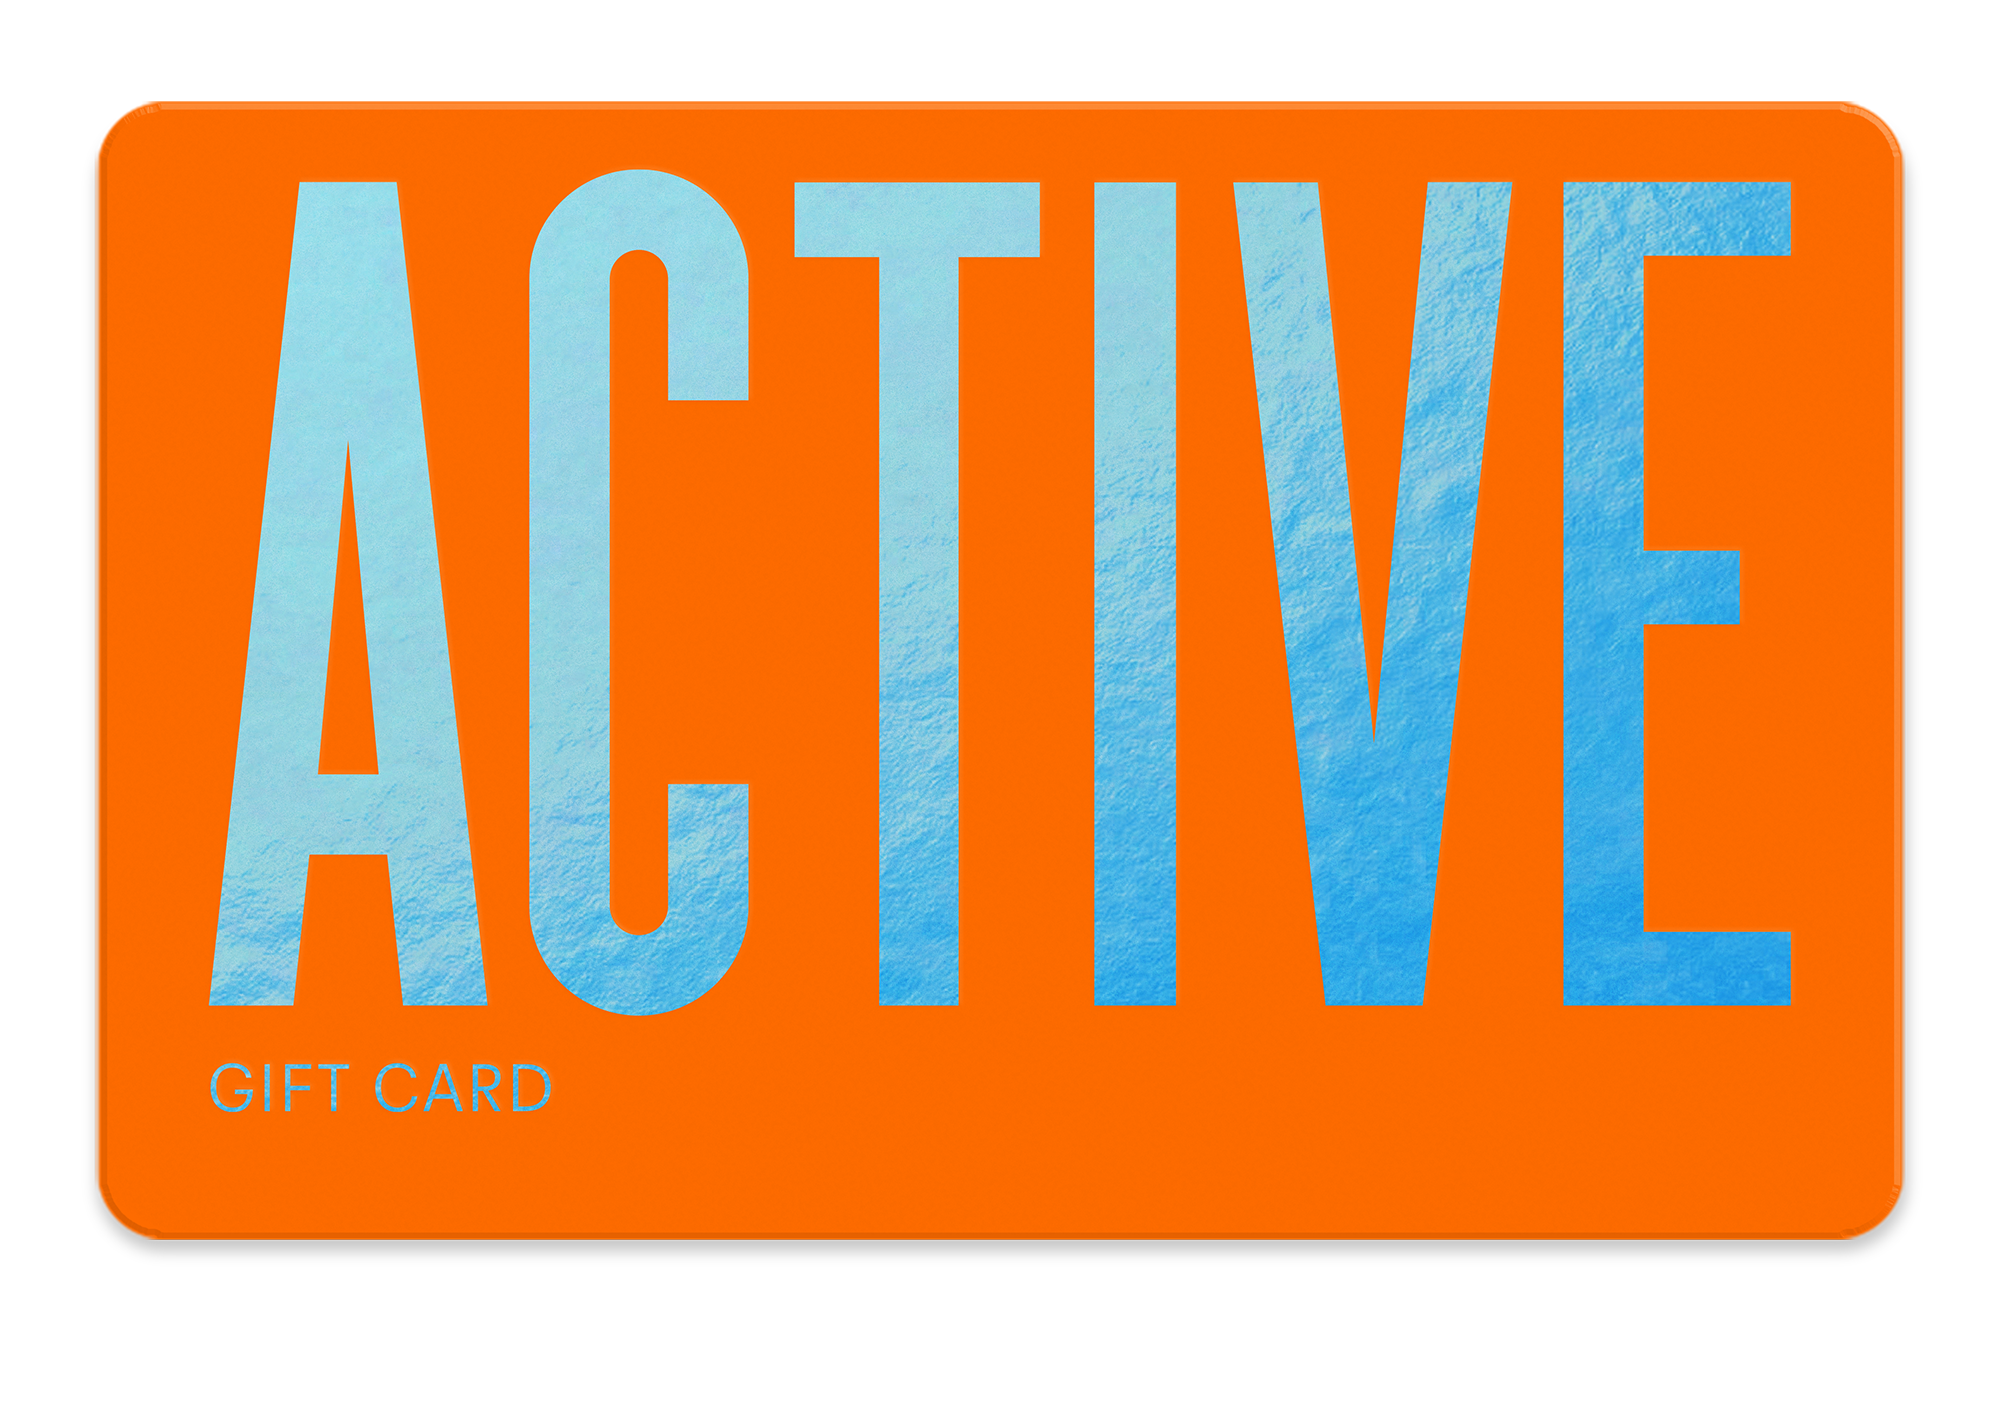 The Active Gift Card – The Card Network